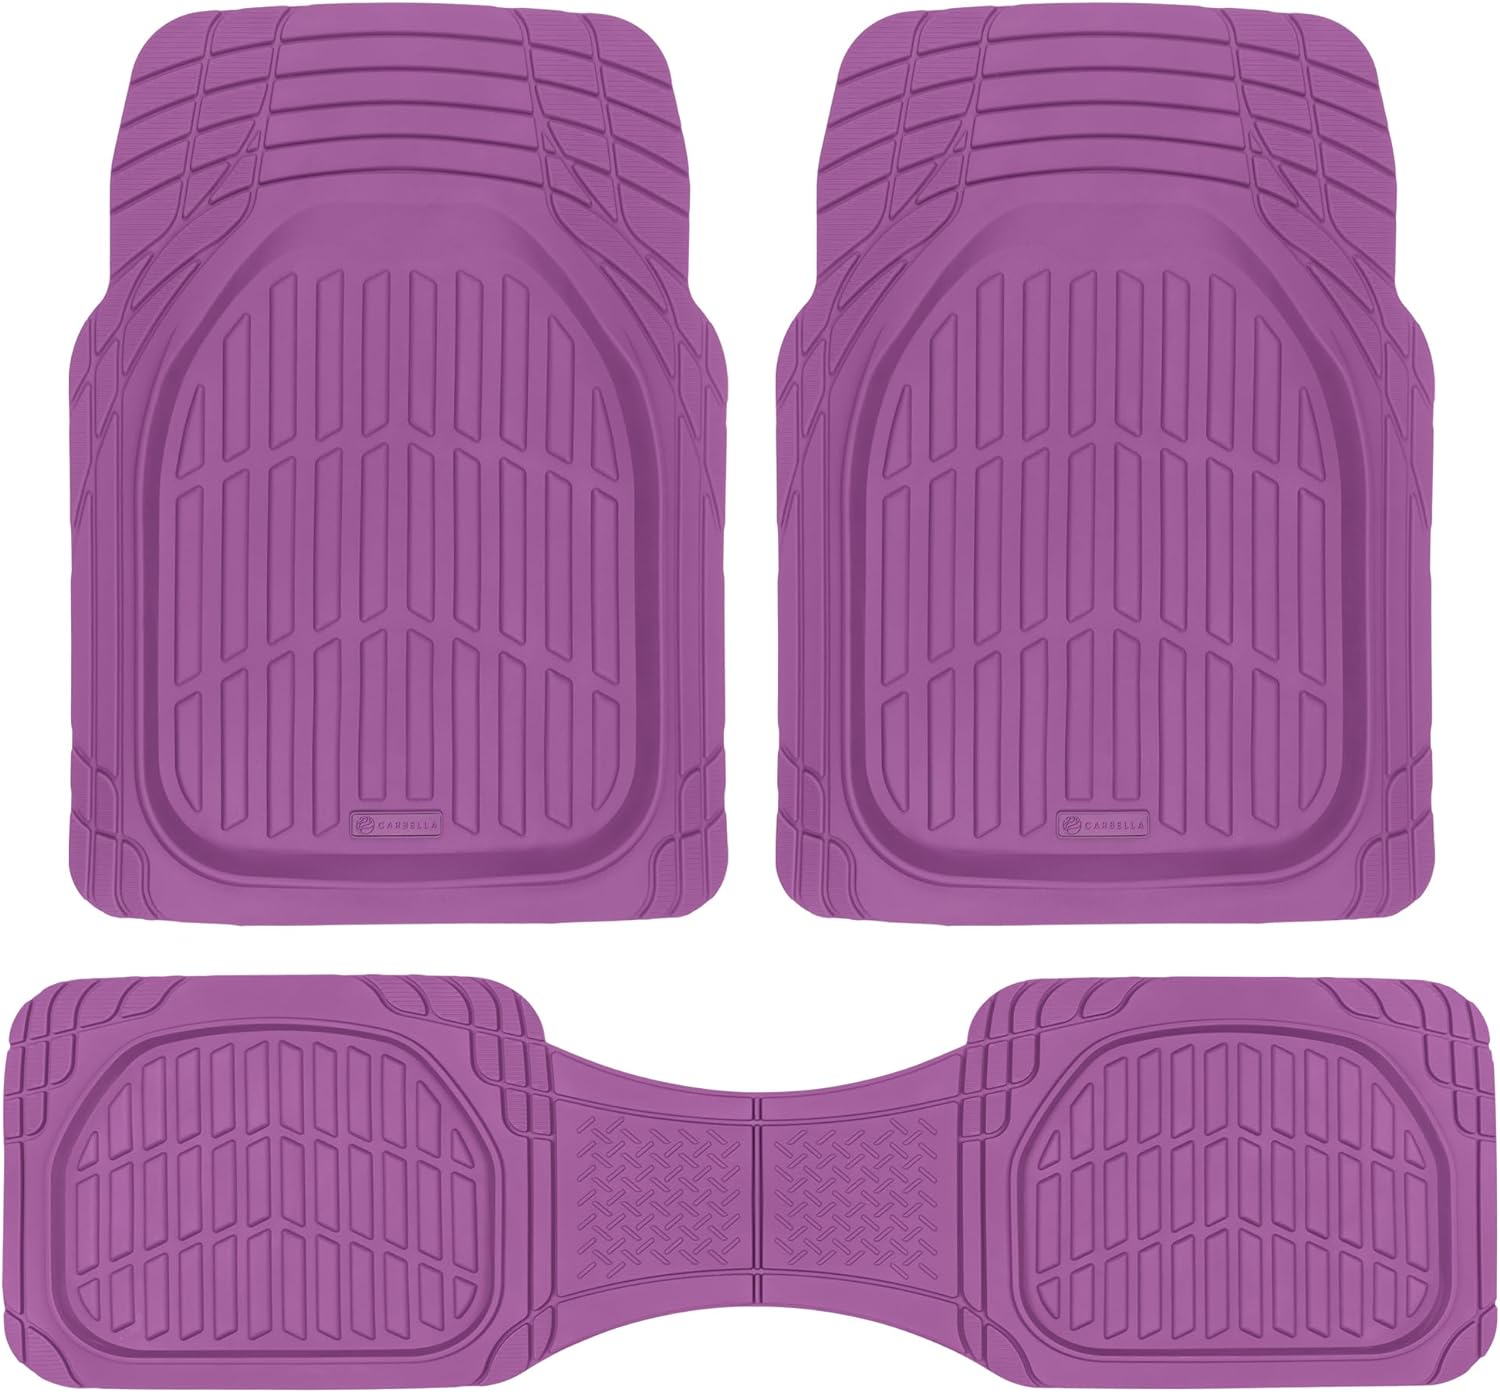 Carbella 3-Piece FlexTough Deep Dish Rubber Front Floor Mats and Rear Floor Mats - Heavy Duty, All Weather, Trim to Fit